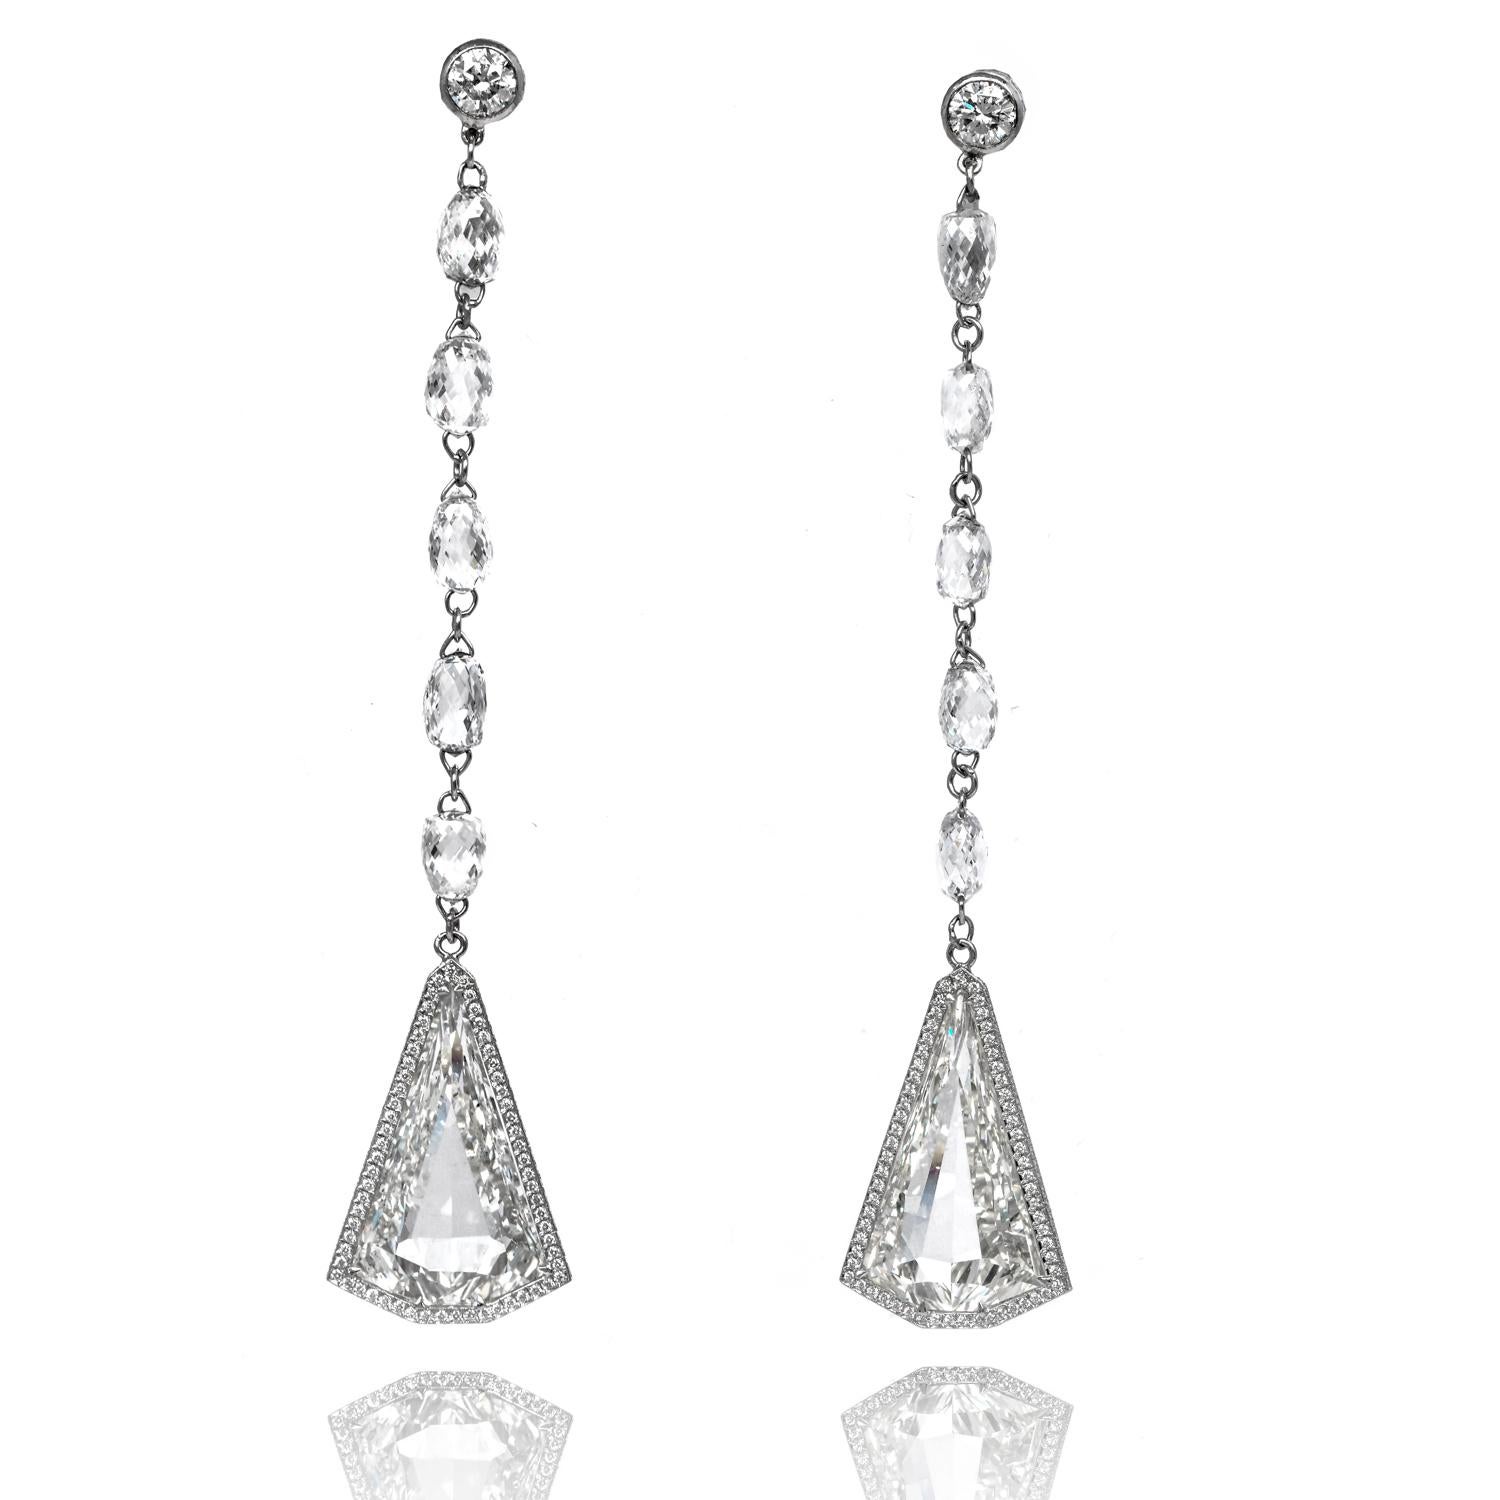 Sparkle elegantly across the room with these breathtaking Diamond 18K Gold Pear Halo Drop Chandelier Chopard Earrings from Copardodissimo Collection.

These earrings present Radiant Heptagon, round brilliant and briolette diamonds bedded in